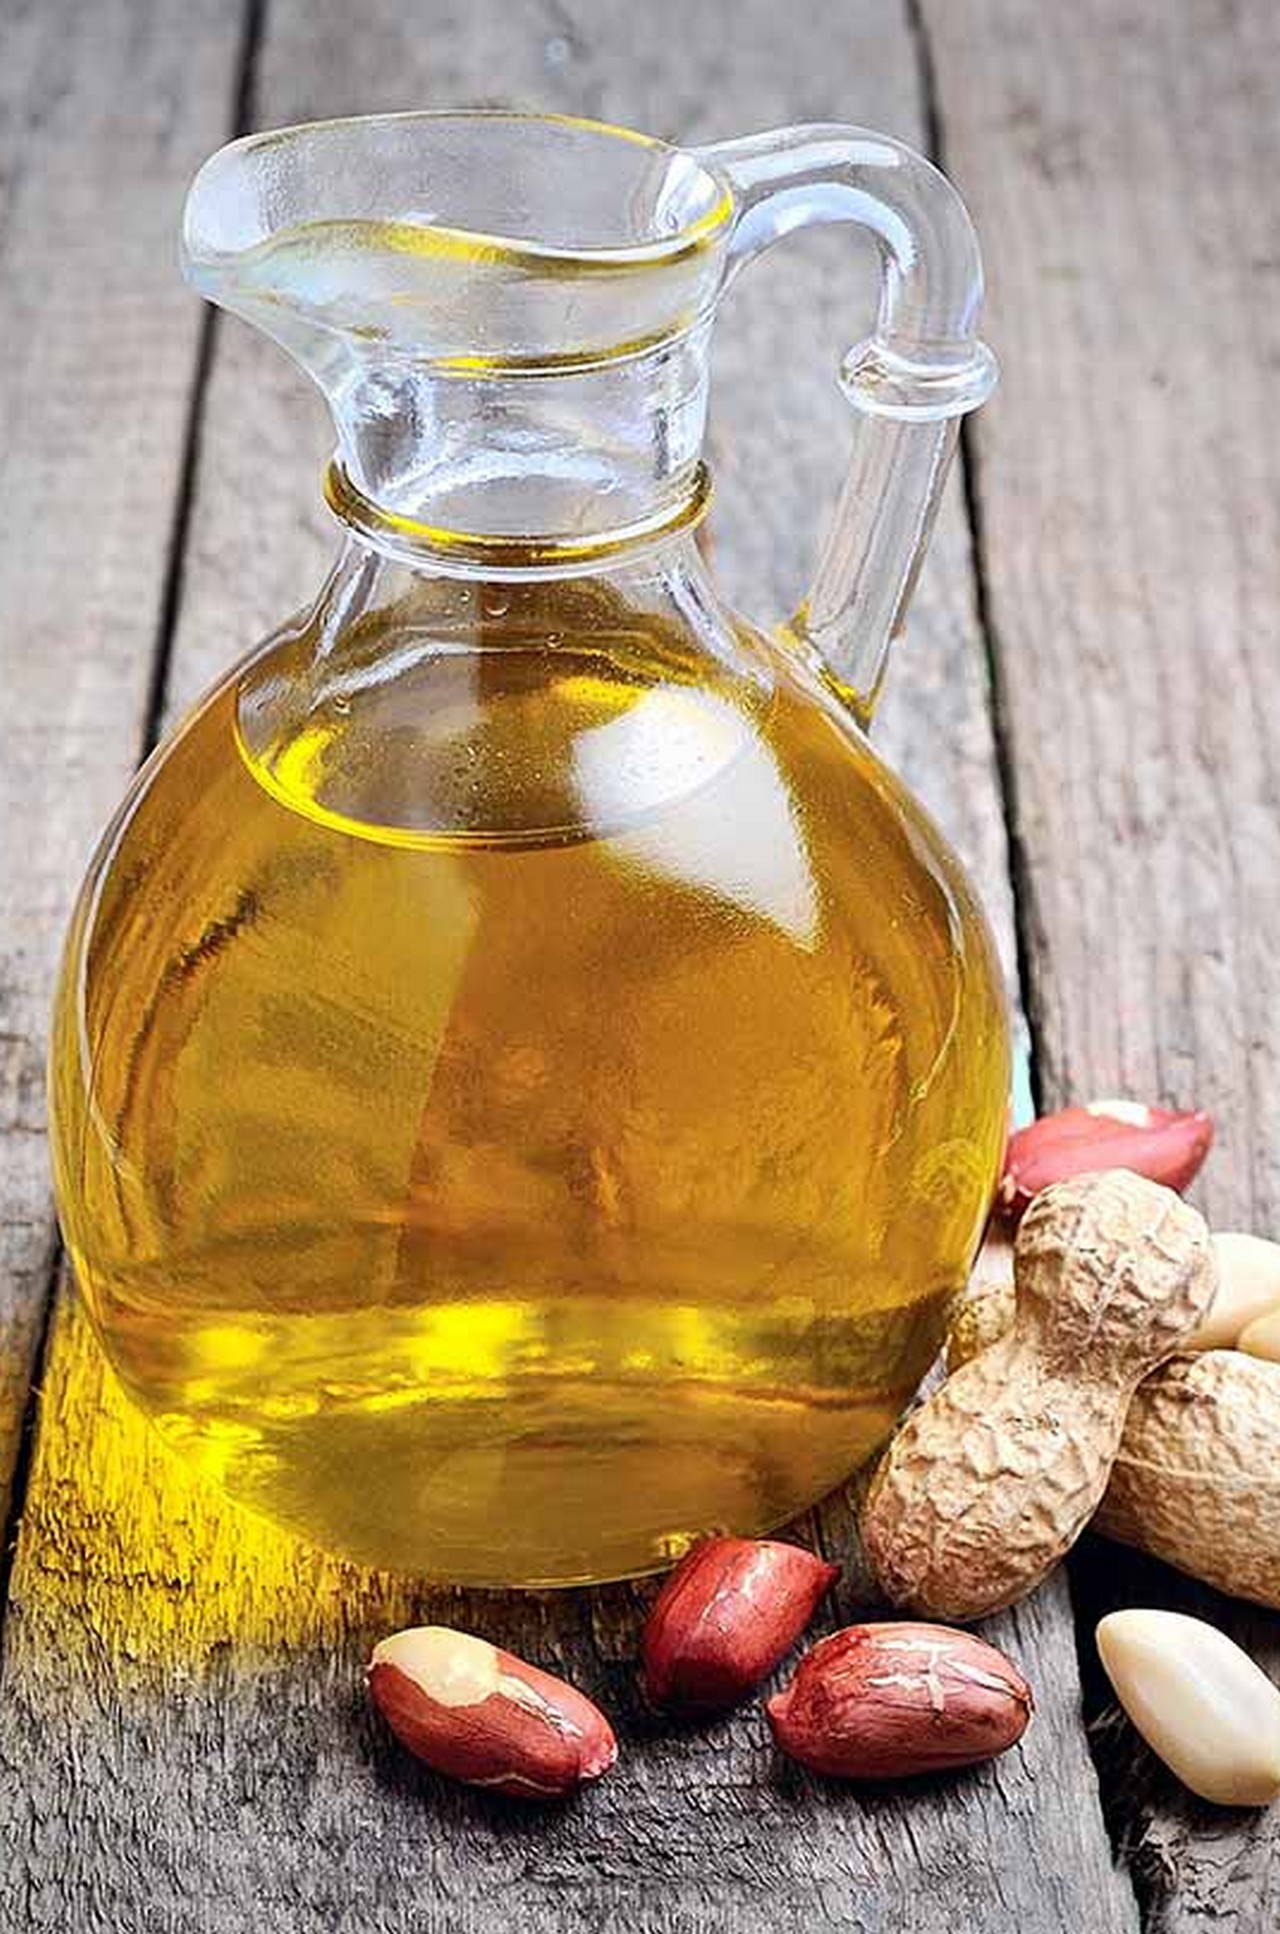  9 Benefits Of Peanut Oil, Types, And Side Effects